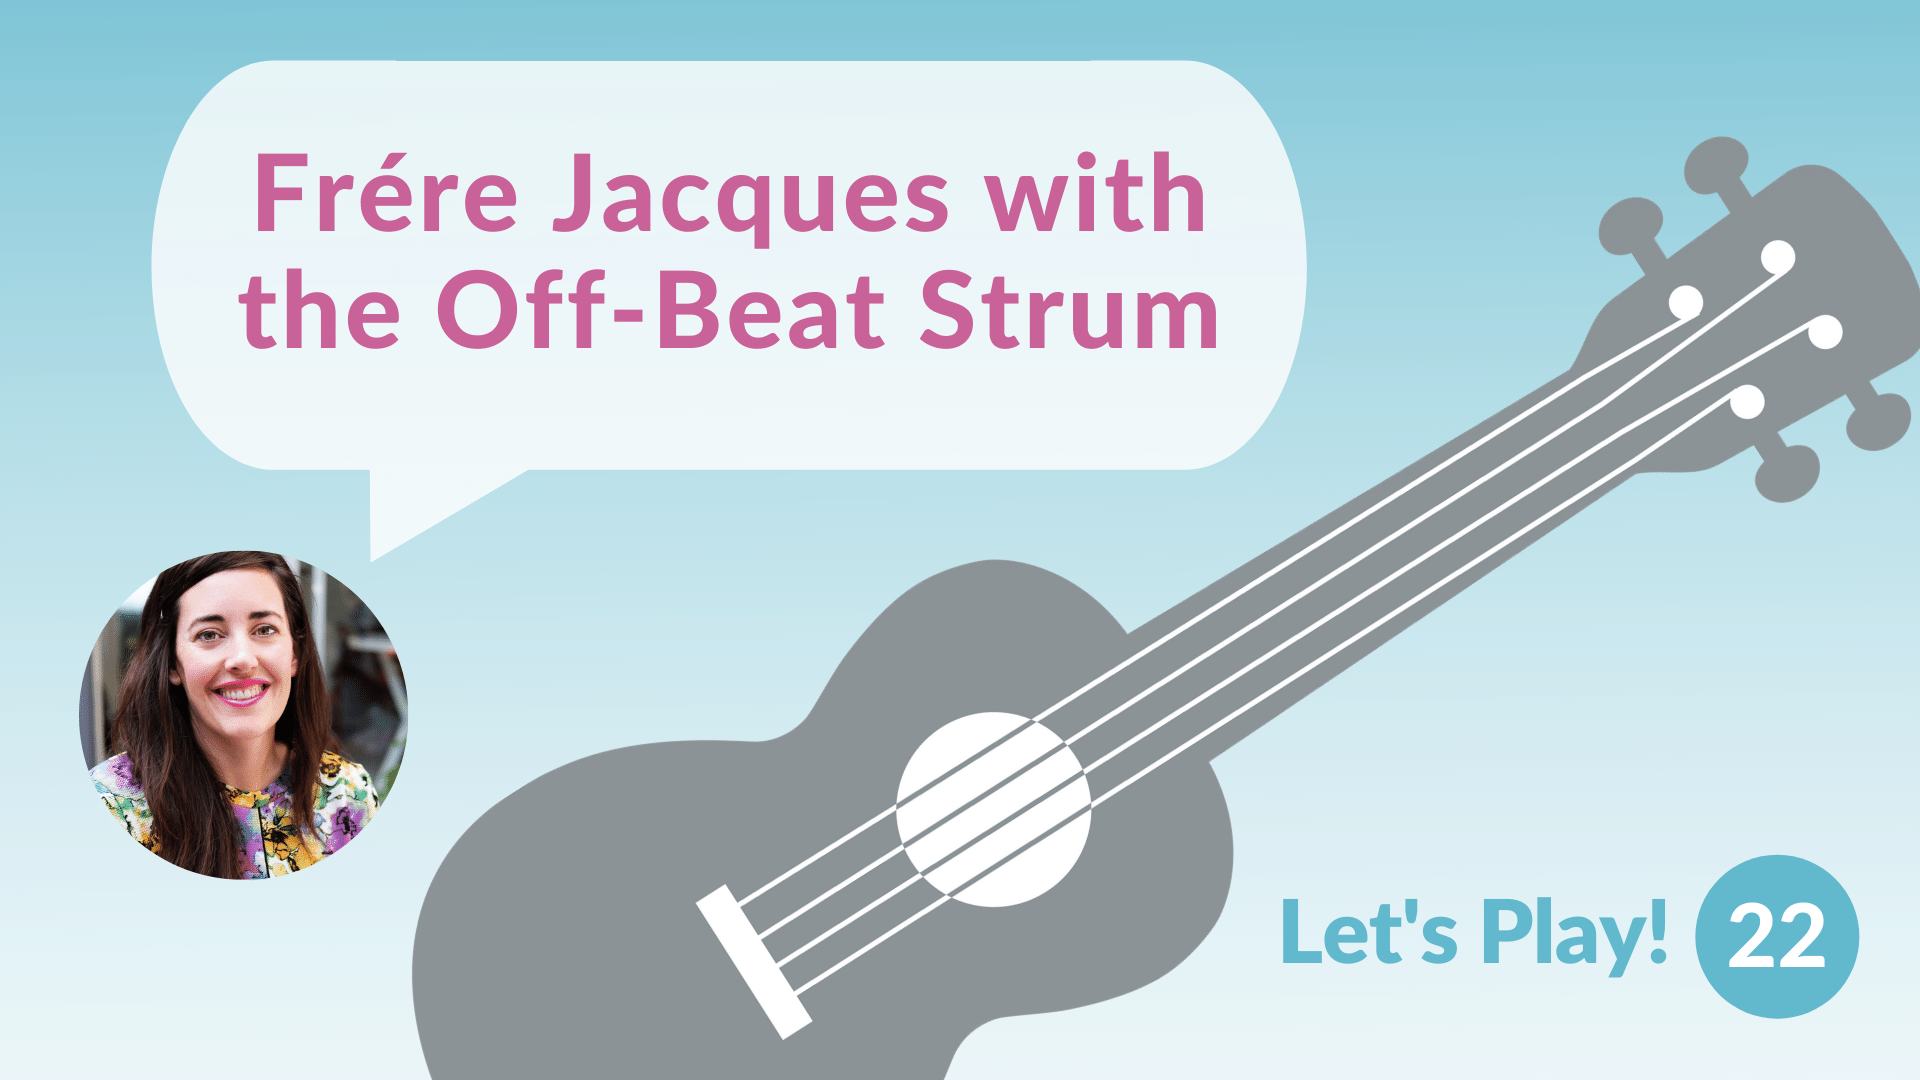 Play Frére Jacques with the Off-Beat Strum